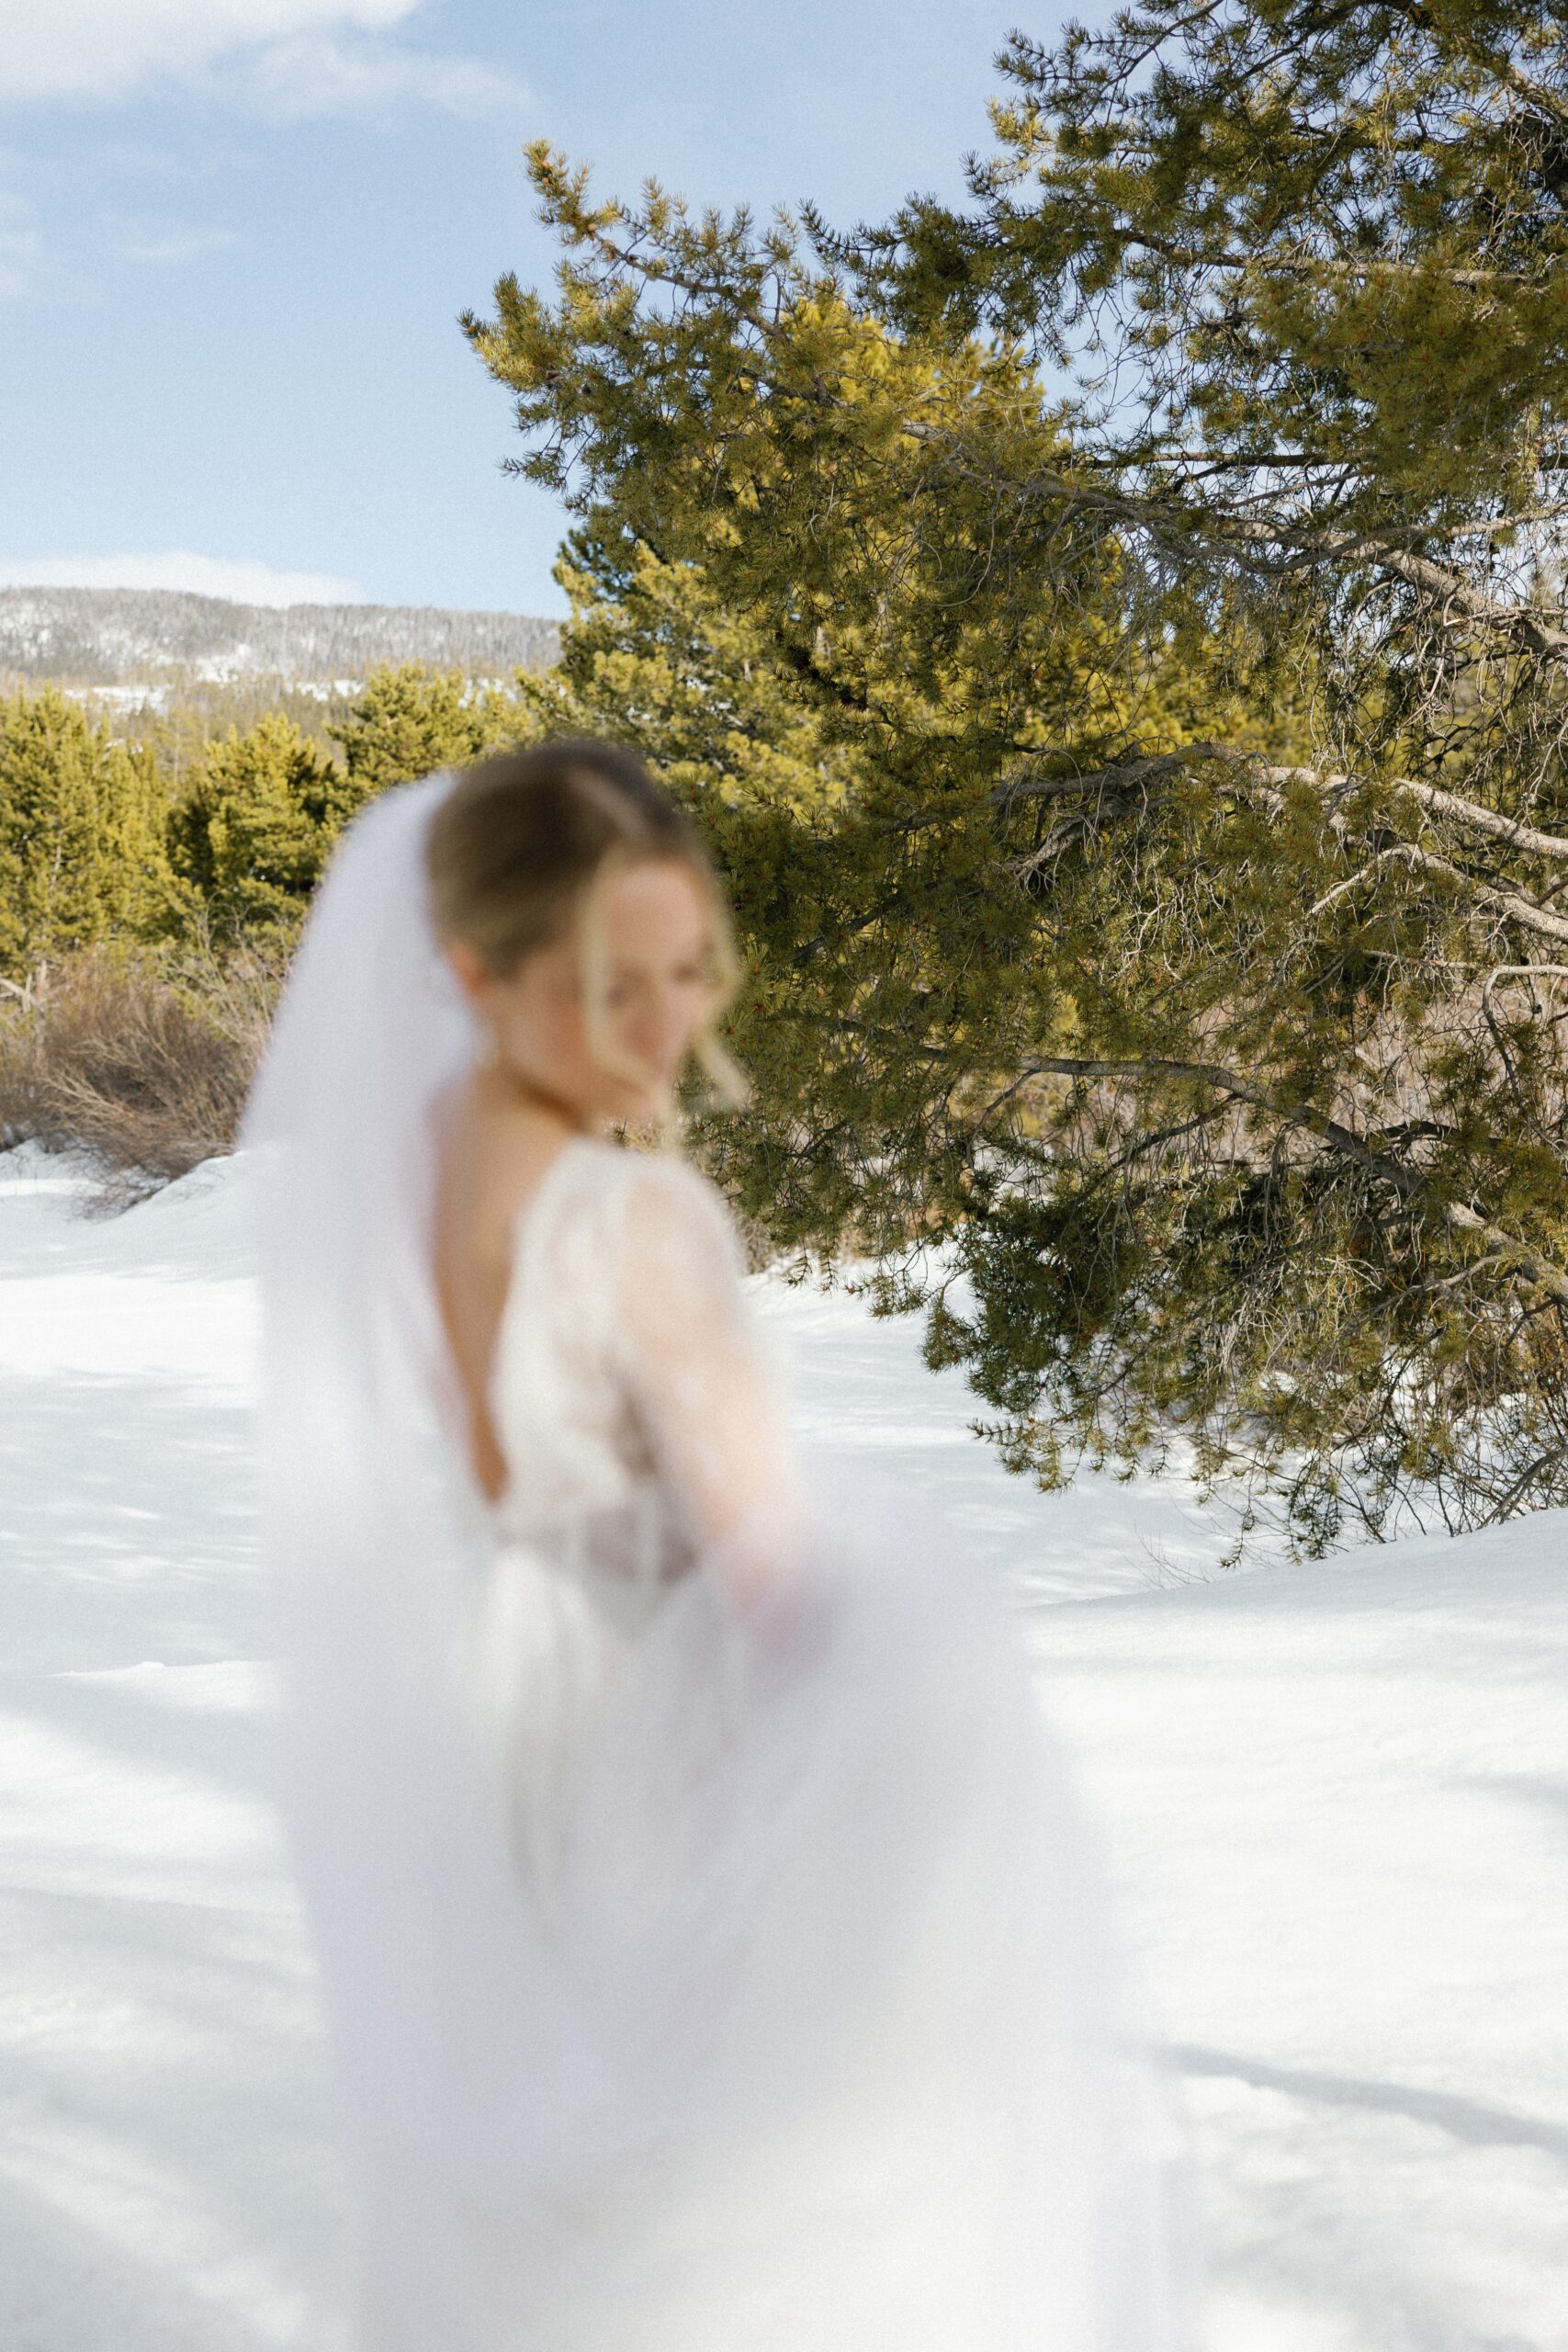 Bride in the snow in her wedding dress with tall pine trees surrounding.